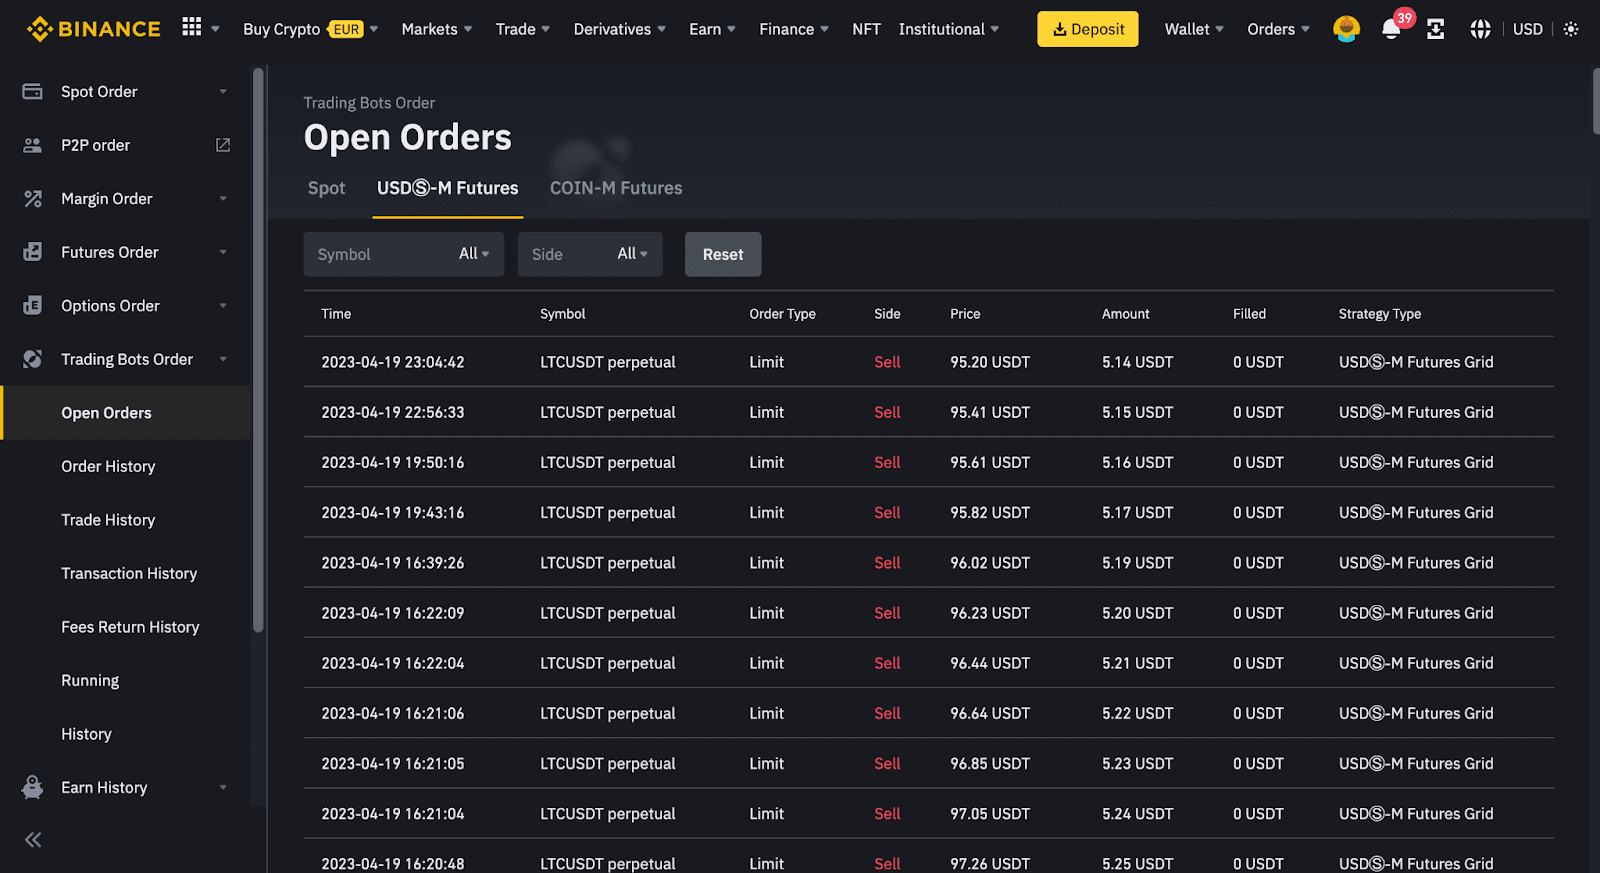 Trading Bots on BSC with Binance Coin (BNB): Automating Investment Strategies